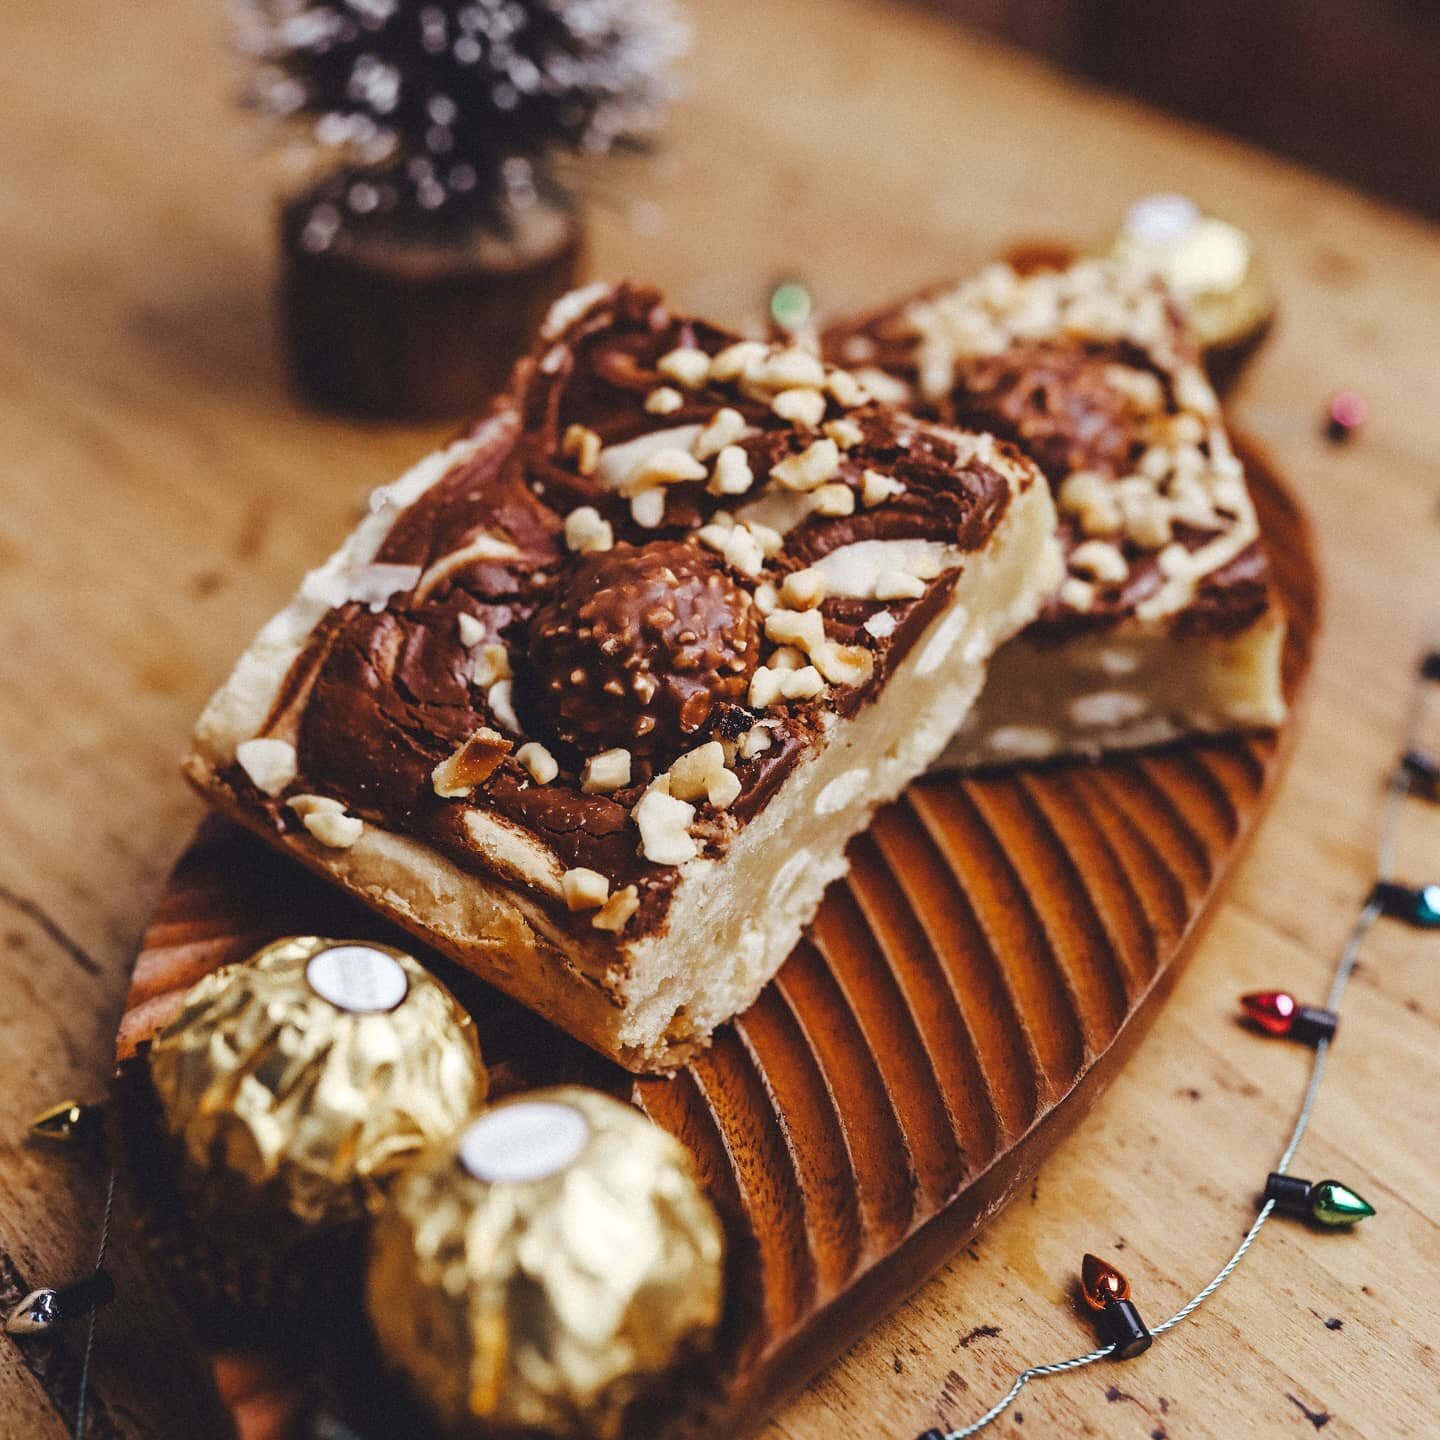 🌊We've added extra capacity for Poole/Bournemouth Christmas Eve deliveries.✌️

🎄Pre-order your custom festive box on our website ❄️

🌰These Ferrero Rocher blondies have been the star of the show this week, who can resist them 🤩